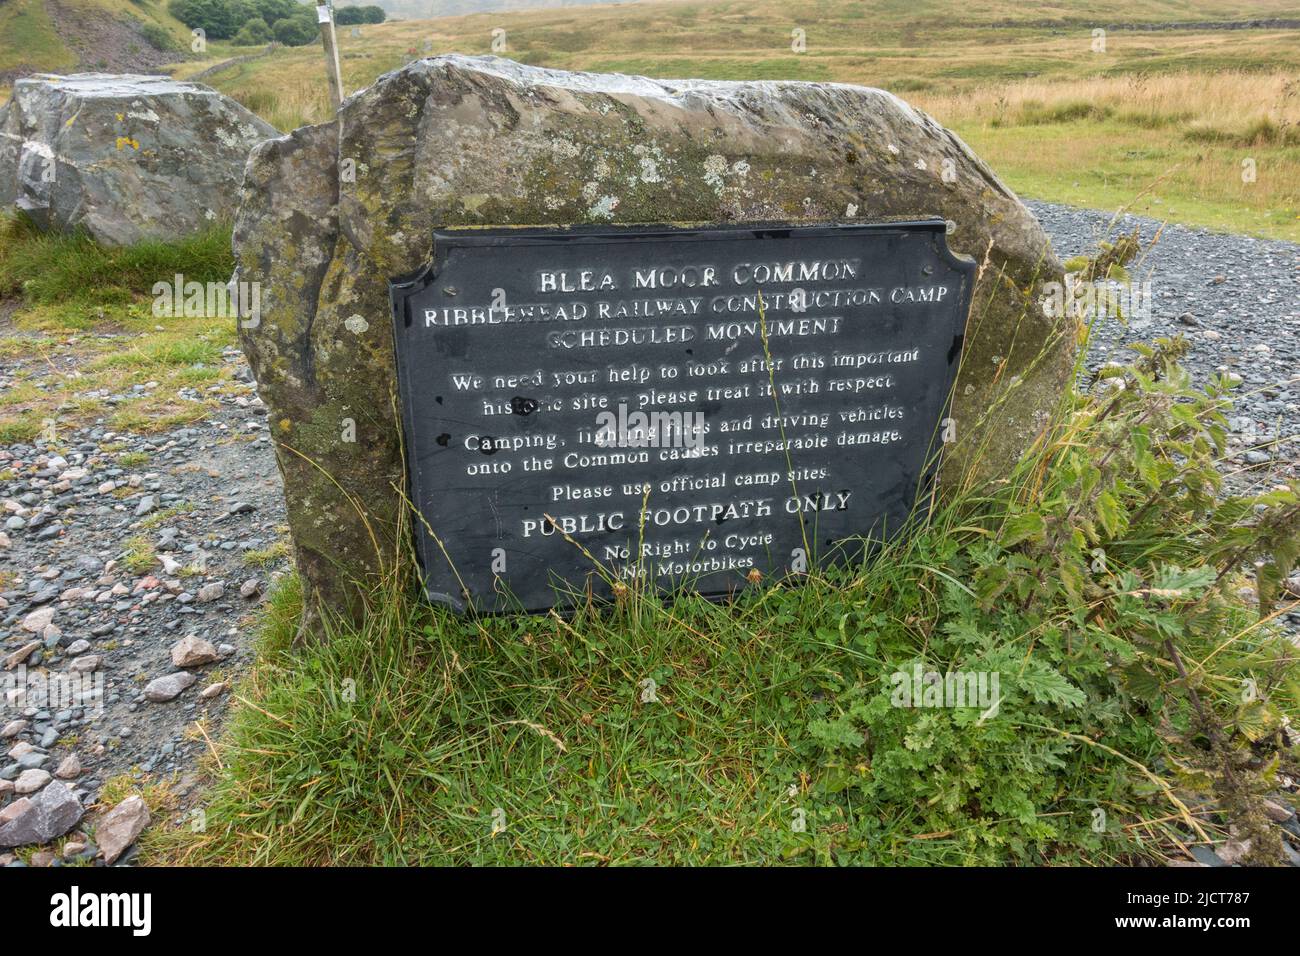 Ribbleshead Railway Construction Camp monument beside the  Ribblehead Viaduct in the Ribble Valley at Ribblehead, in North Yorkshire, England. Stock Photo